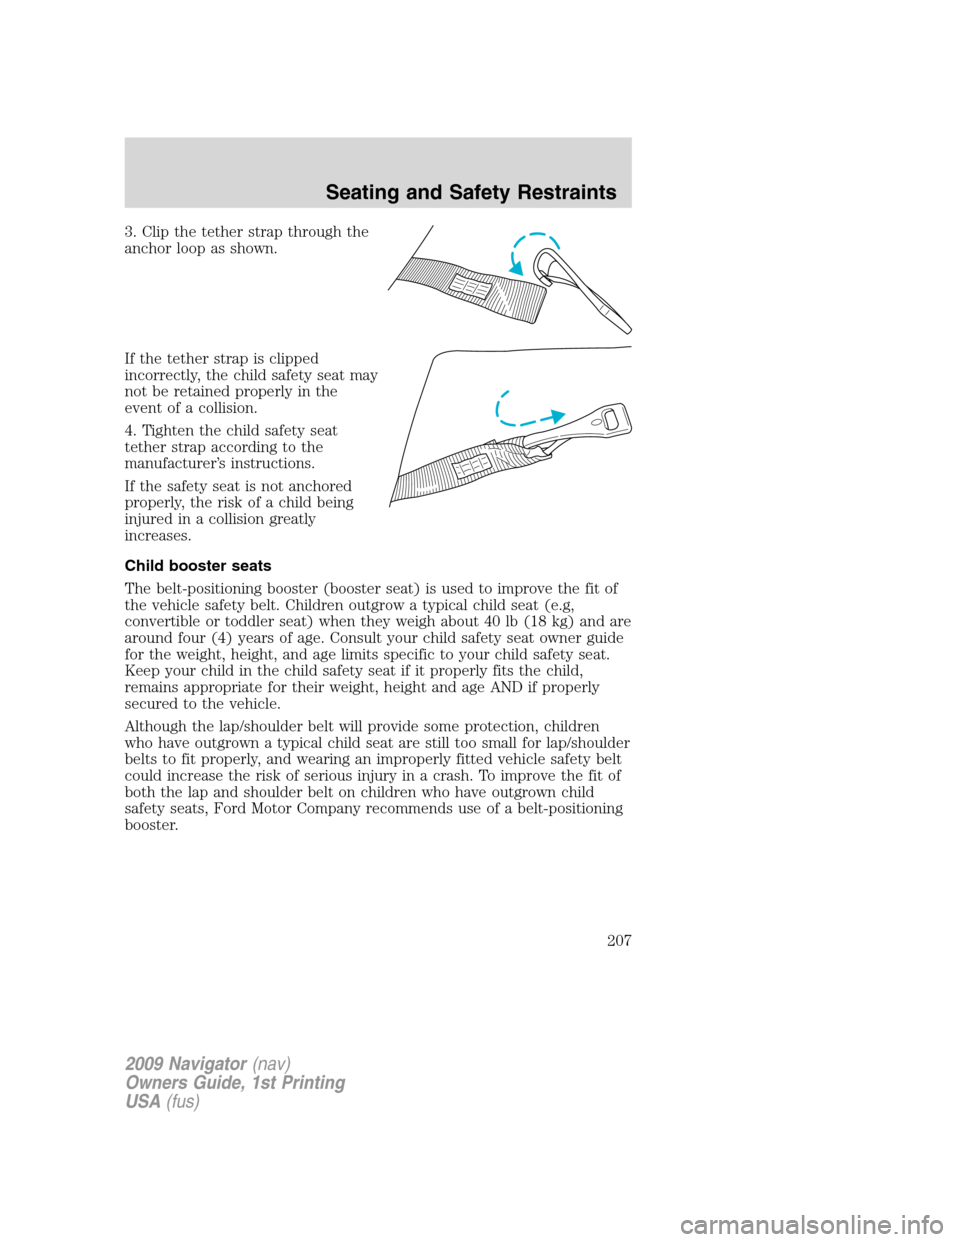 LINCOLN NAVIGATOR 2009 Service Manual 3. Clip the tether strap through the
anchor loop as shown.
If the tether strap is clipped
incorrectly, the child safety seat may
not be retained properly in the
event of a collision.
4. Tighten the ch